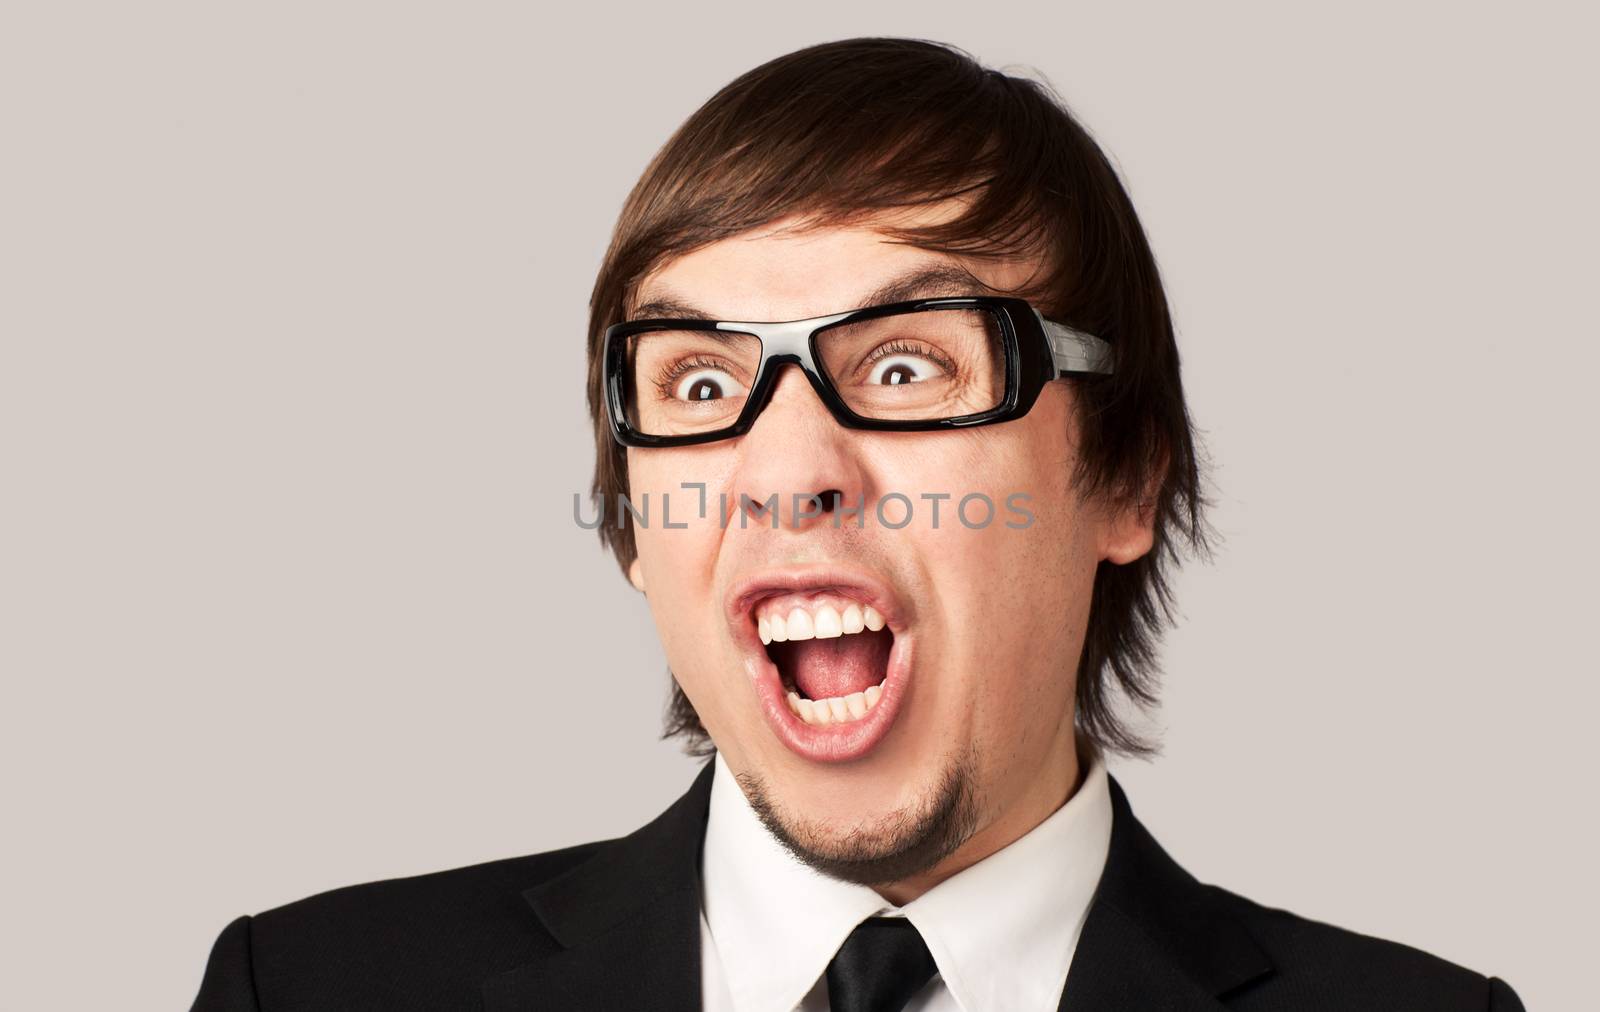 Close-up photo of screaming businessman, on a gray background